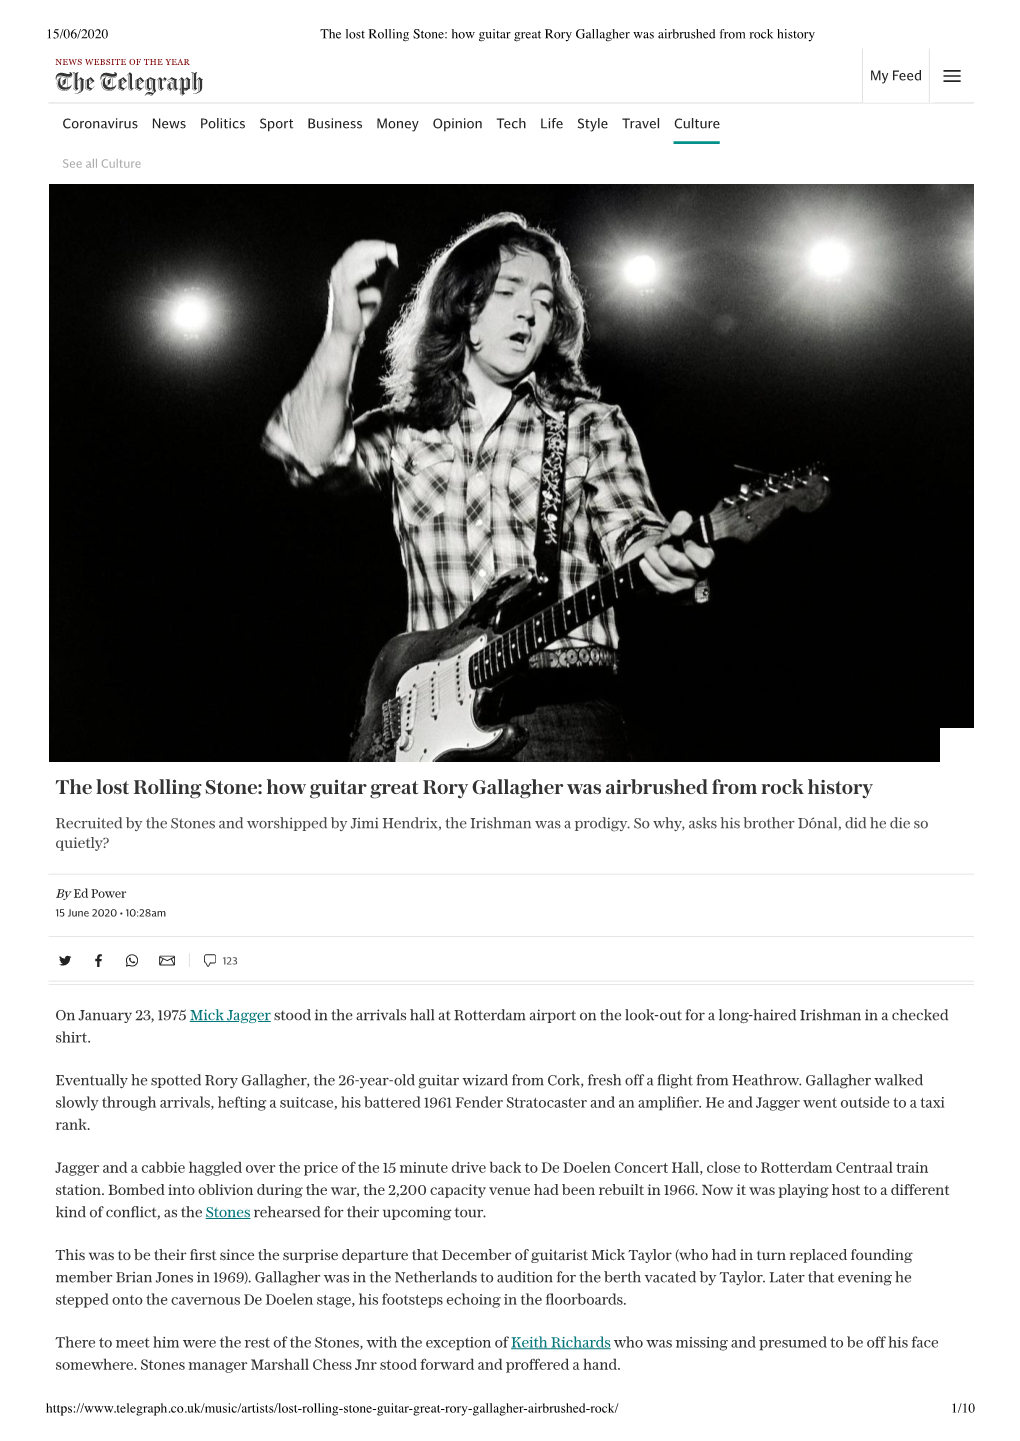 The Lost Rolling Stone: How Guitar Great Rory Gallagher Was Airbrushed ...